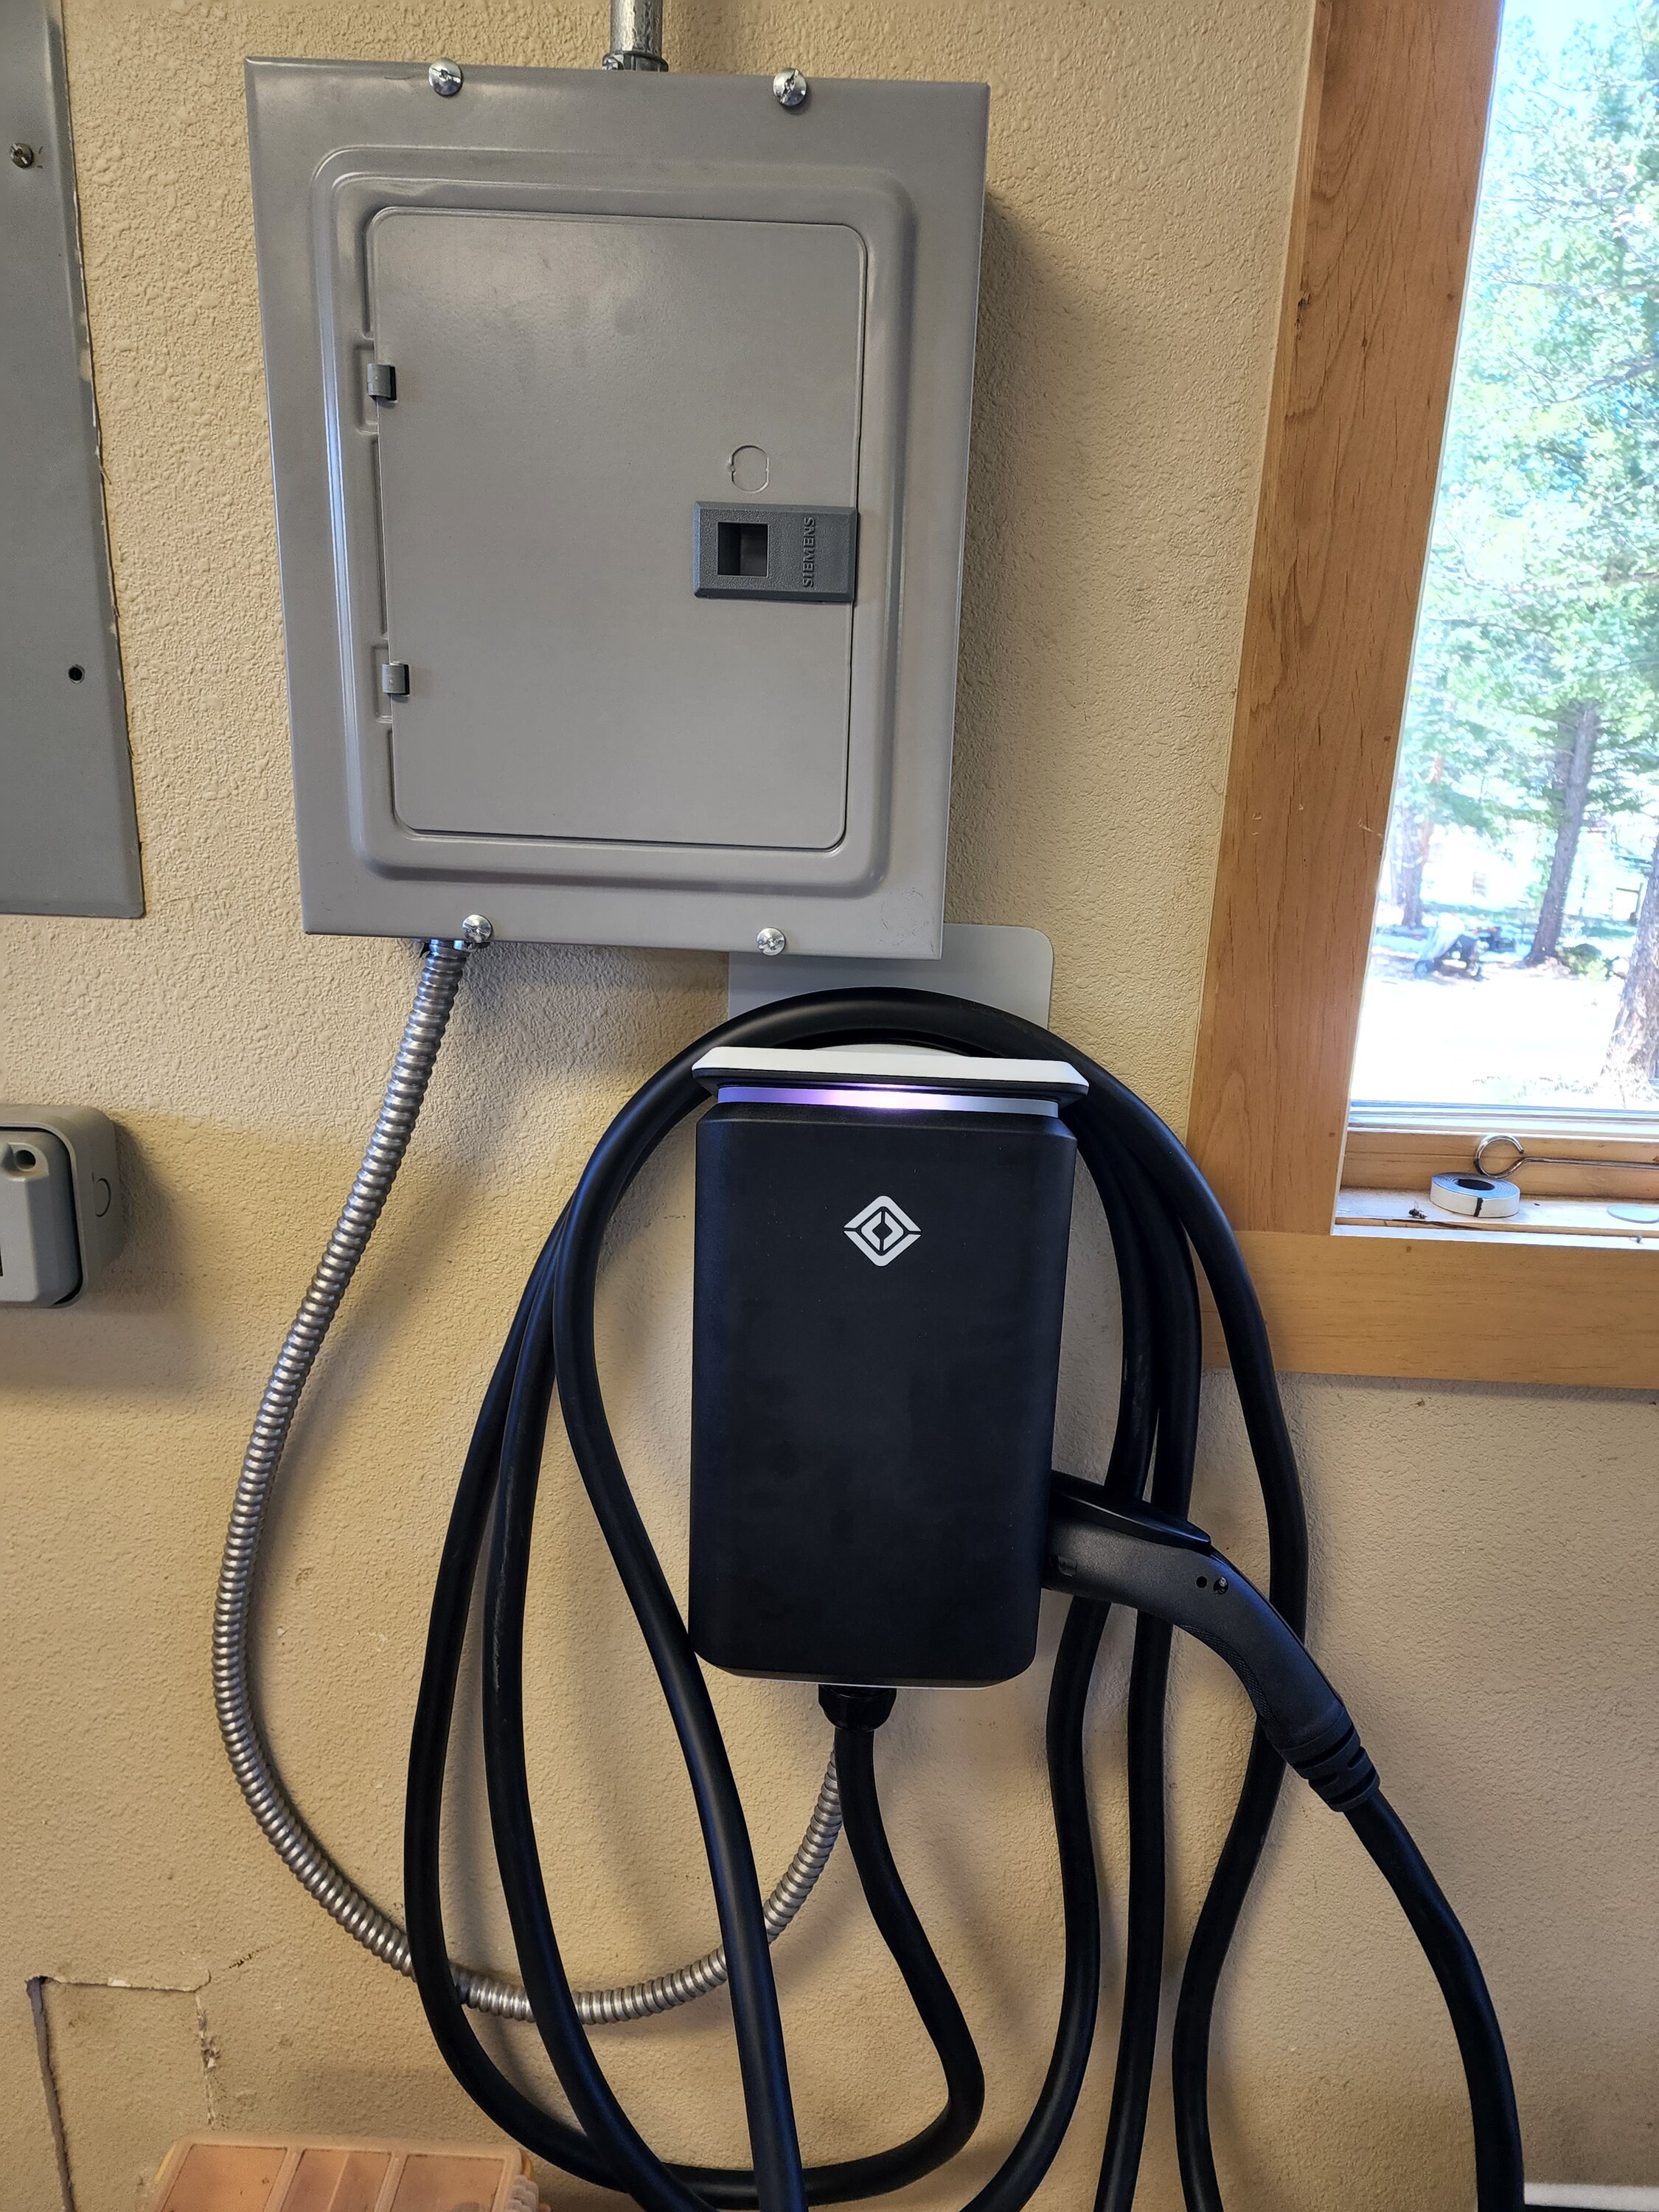 Rivian R1T R1S Wall charger installation at home - suggestions and recommendations? ⚡️⚡️ 20220525_121436